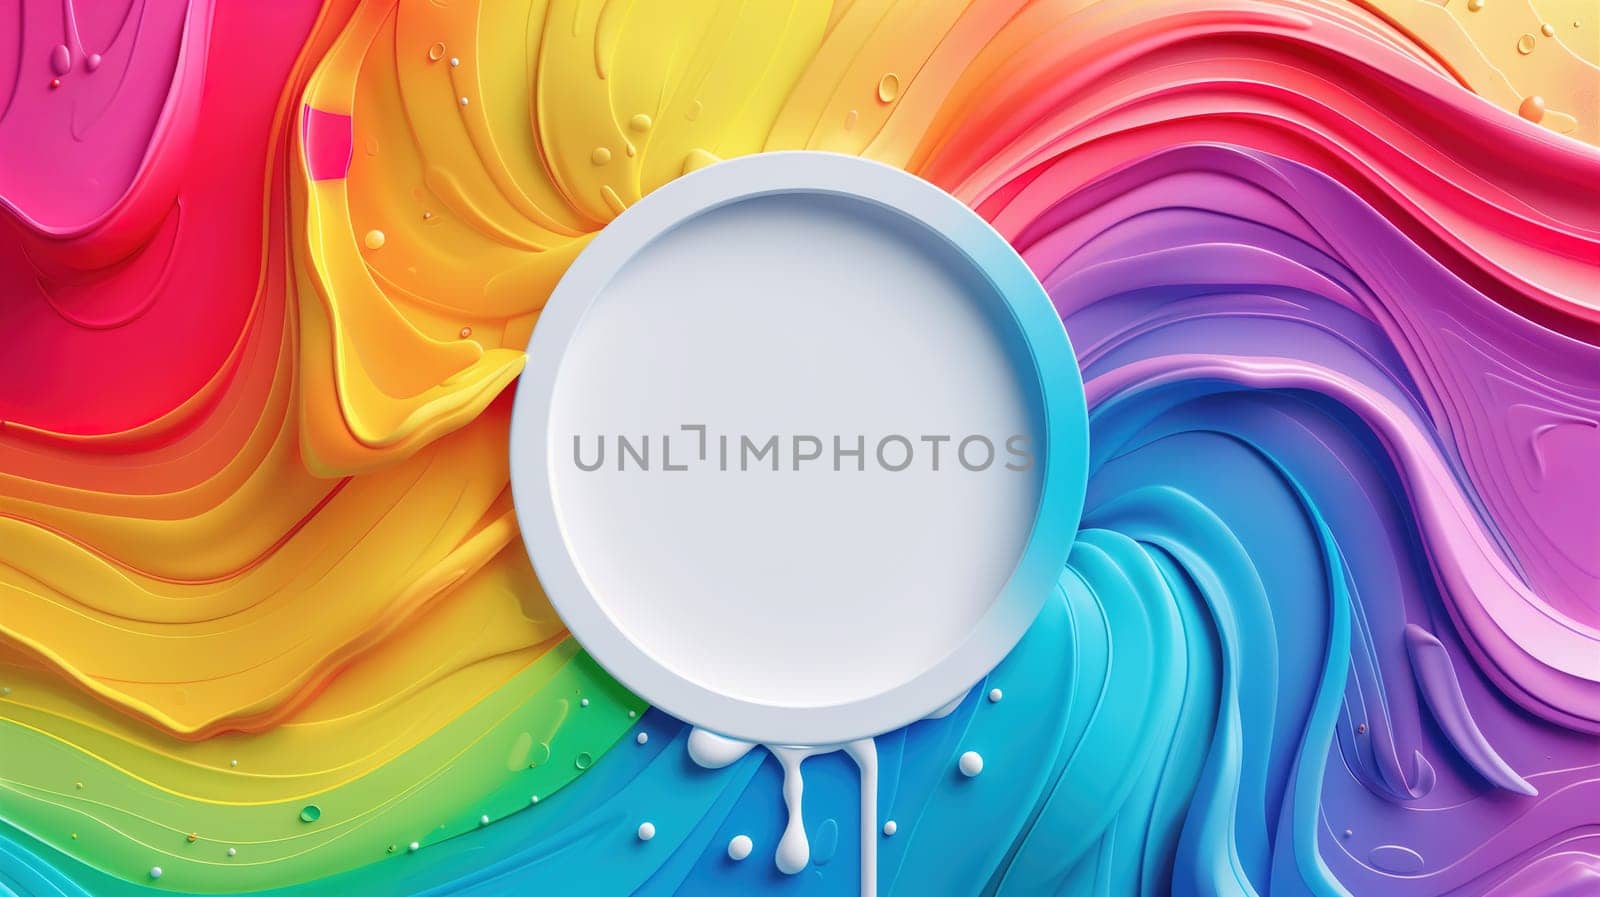 Rainbow Colored Background With White Round Object by TRMK